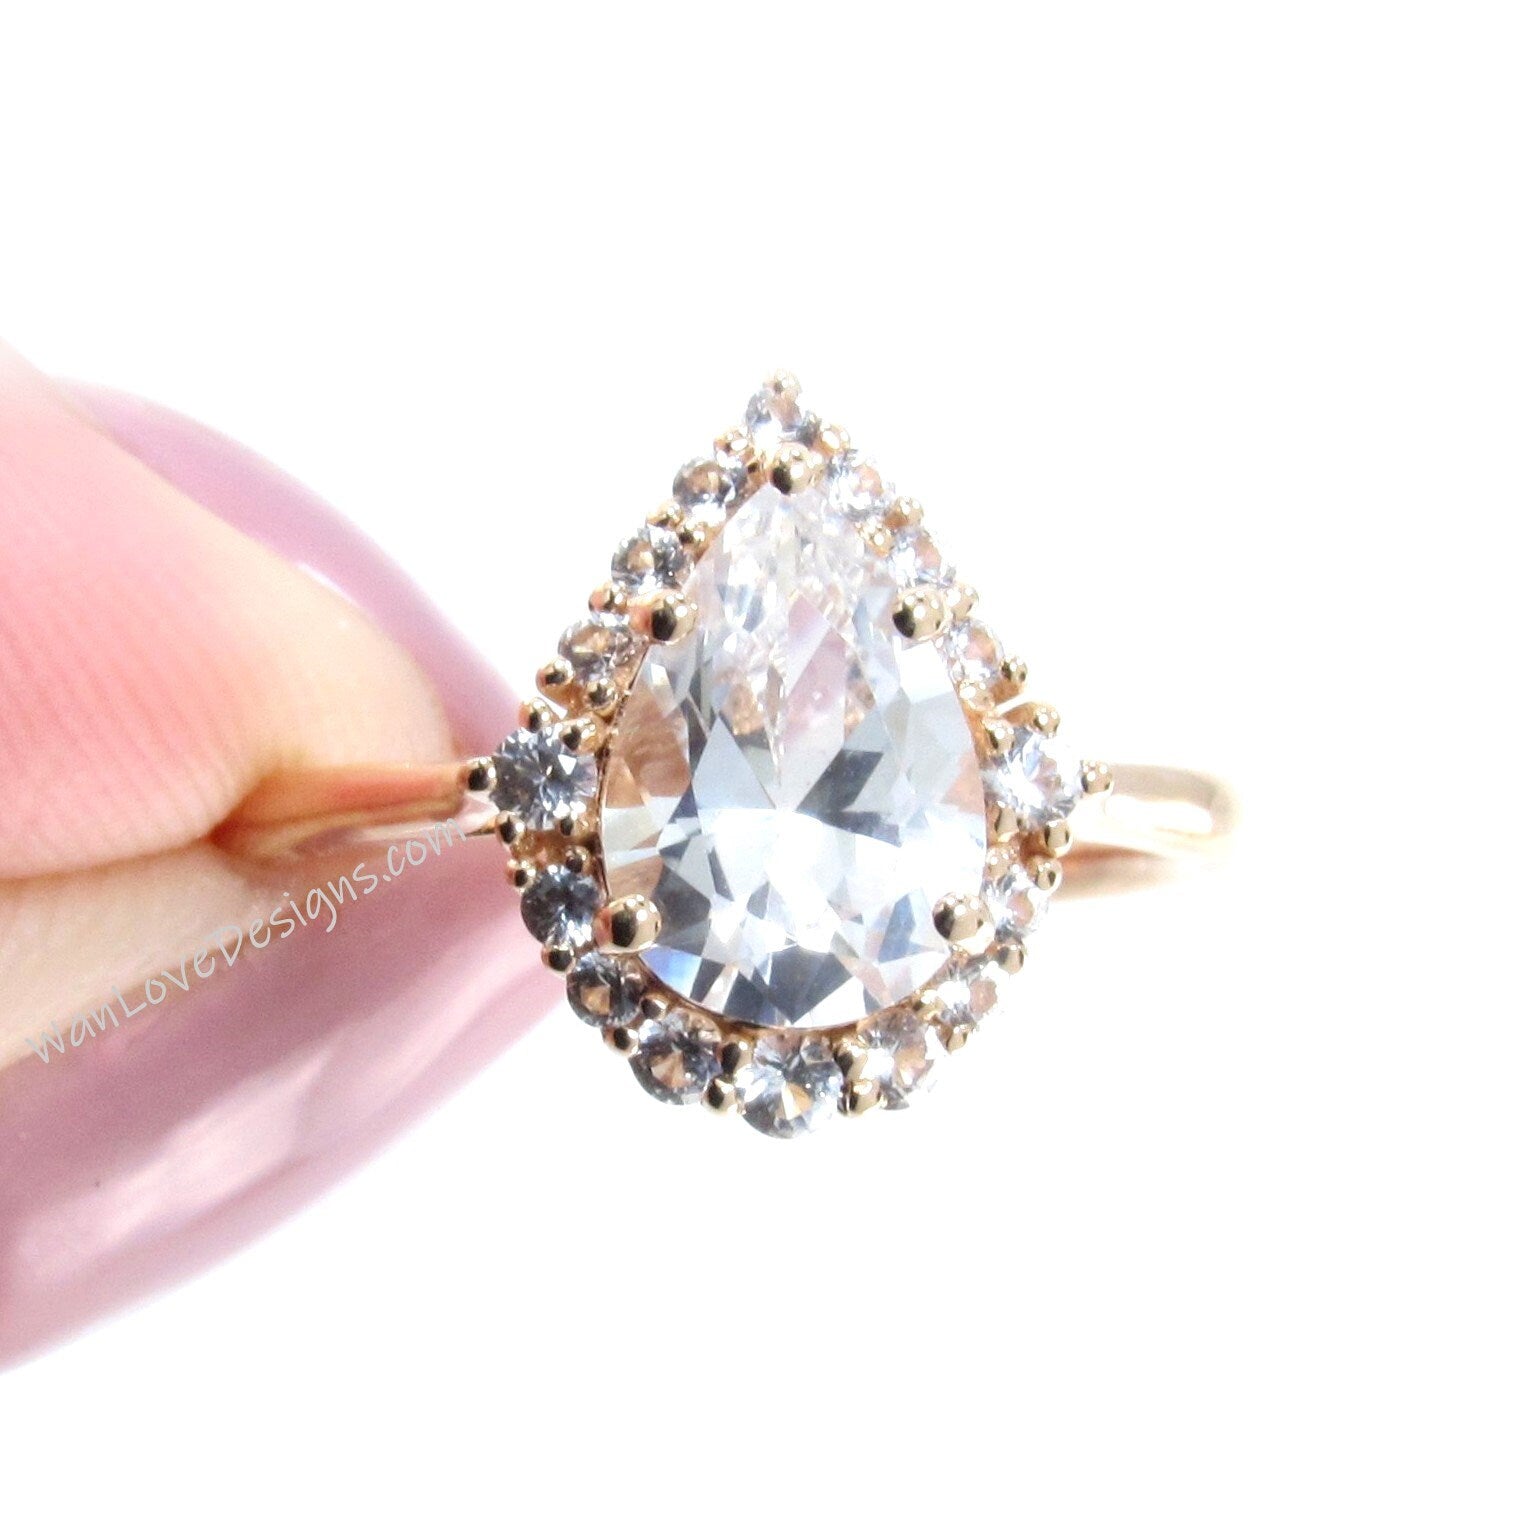 Pear shape White Sapphire engagement ring rose gold vintage unique ring women Graduated Cluster Halo/Sapphire Promise gift-Ready to Ship Wan Love Designs